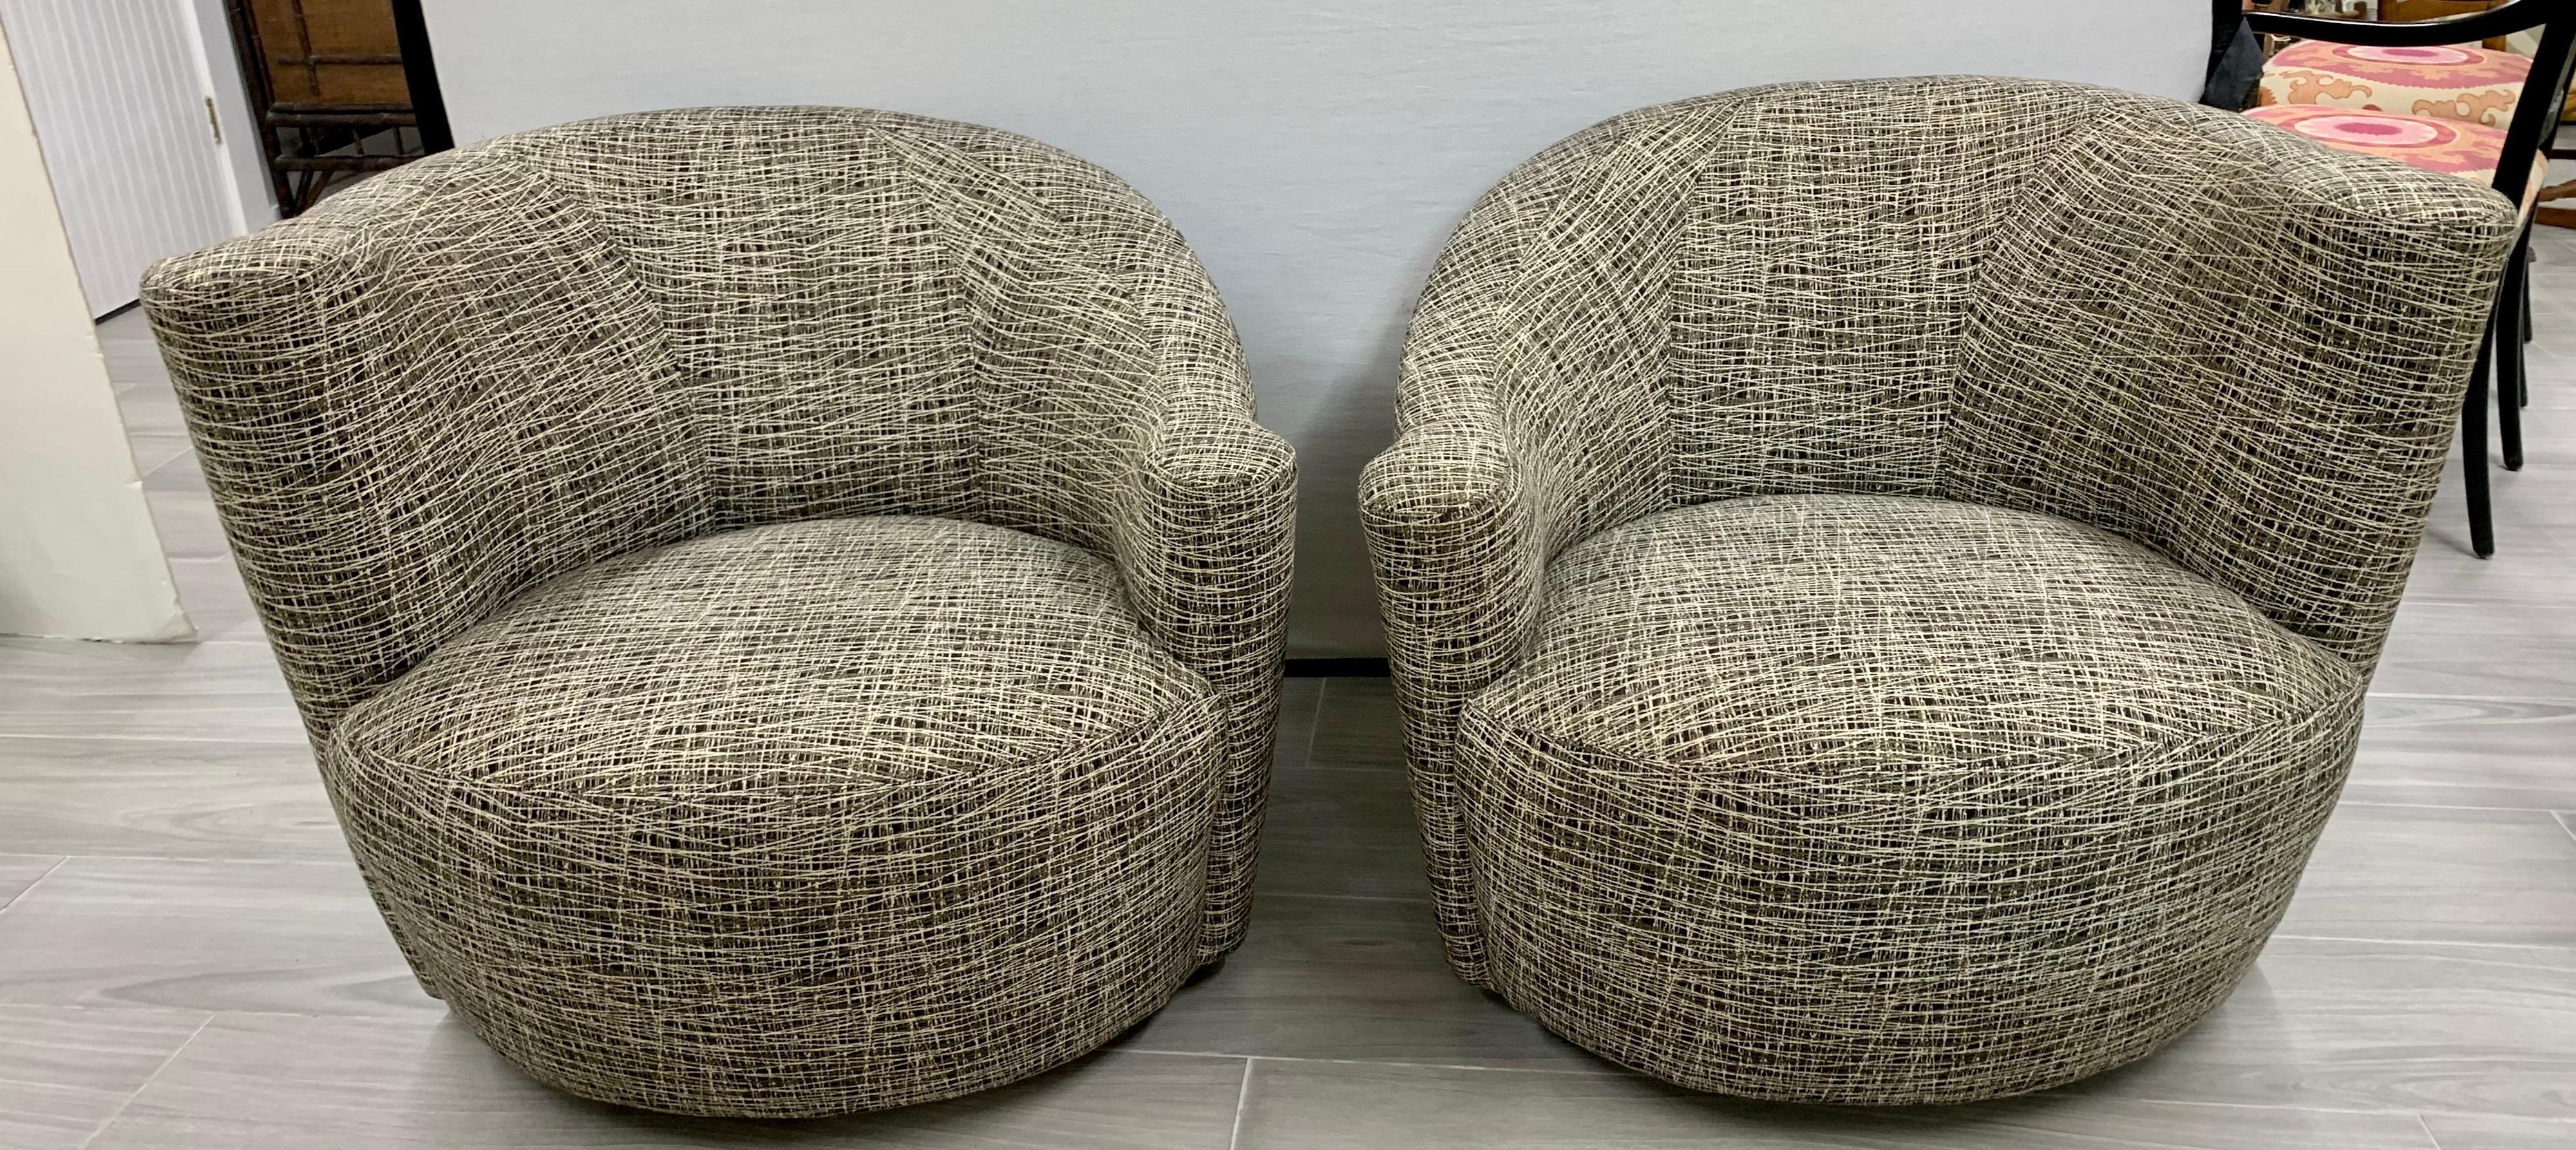 Magnificent matching pair of early 1980's Nautilus chair that have been new reupholstered. The fabric is an abstract and nothing short of spectacular. Now, more than ever, home is where the heart is.